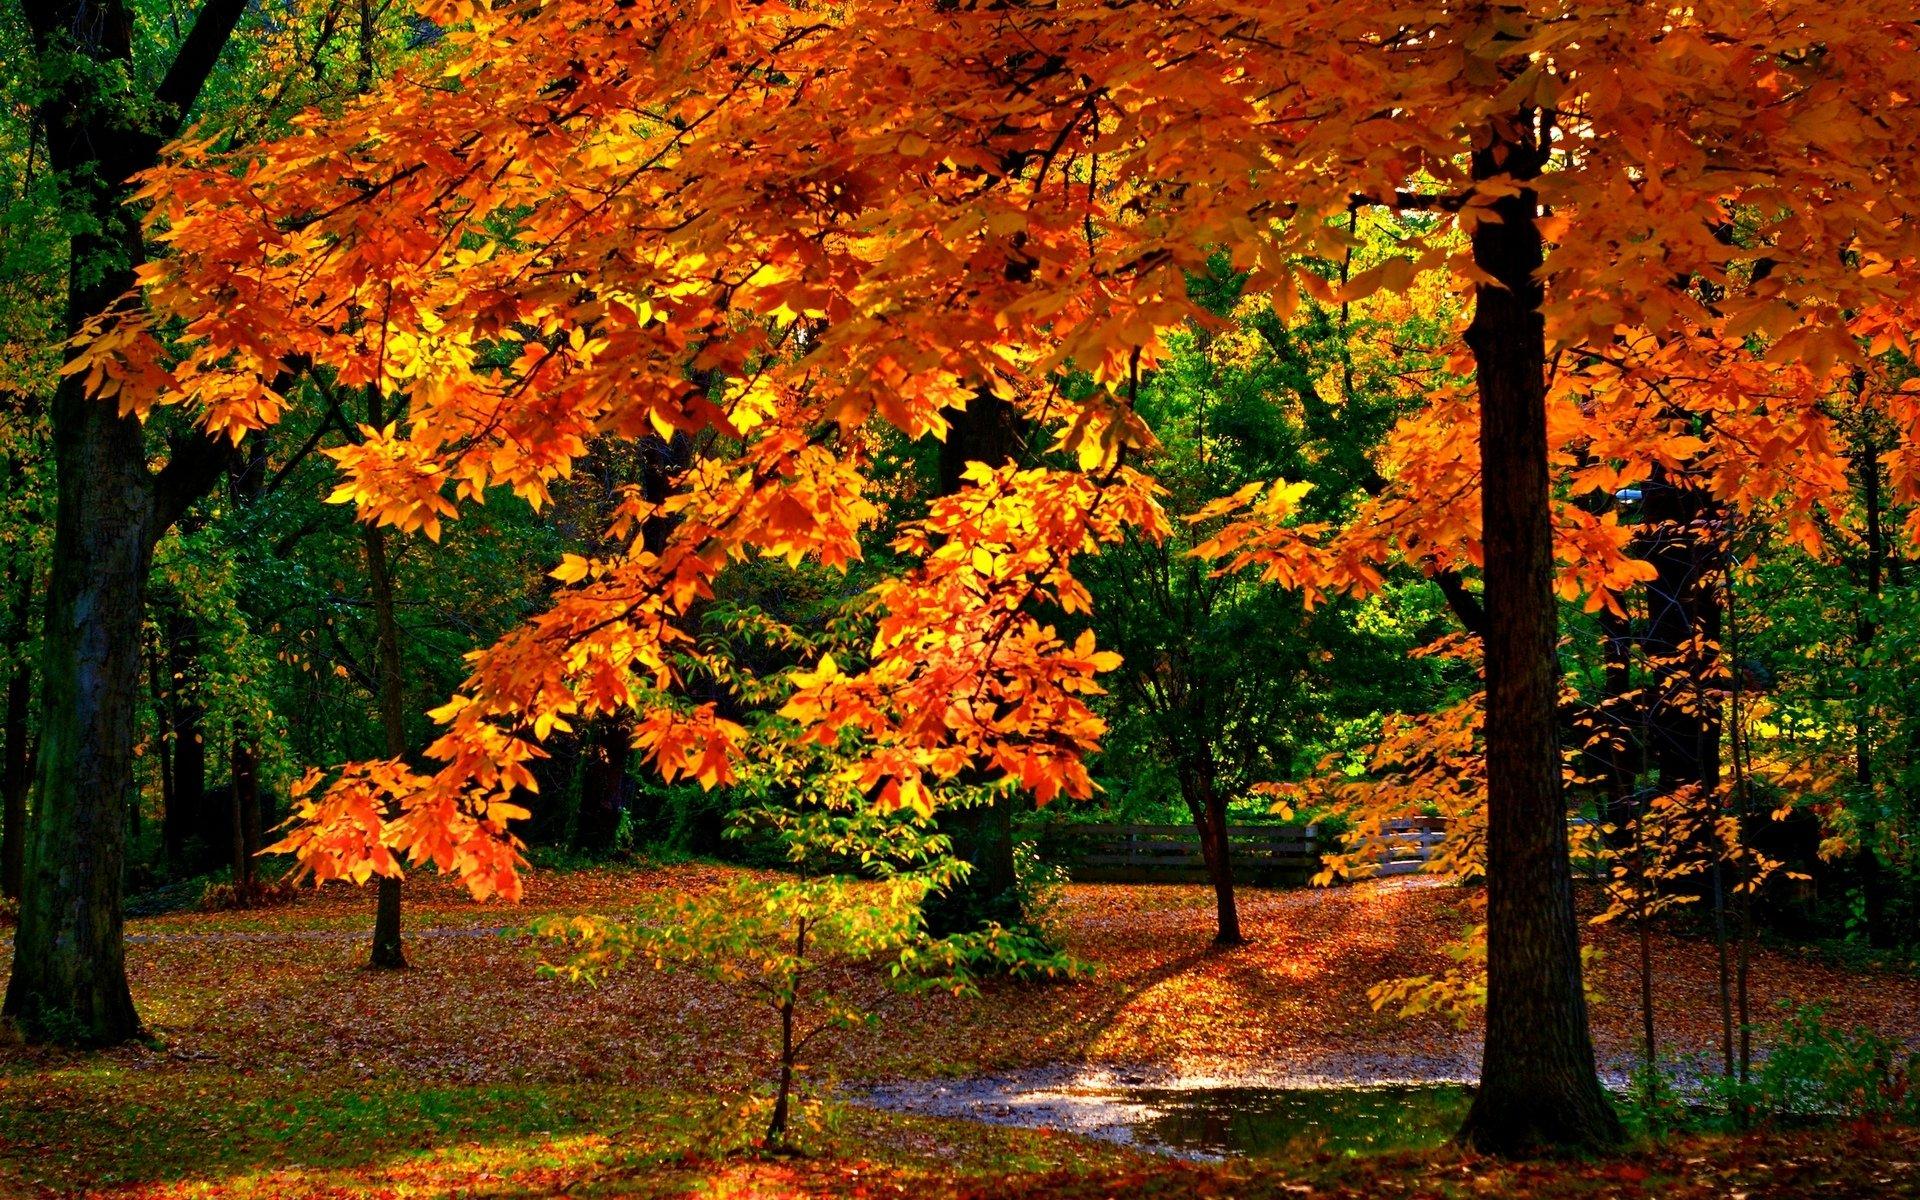 Sunny Day in Autumn Park HD Wallpaper. Background Image